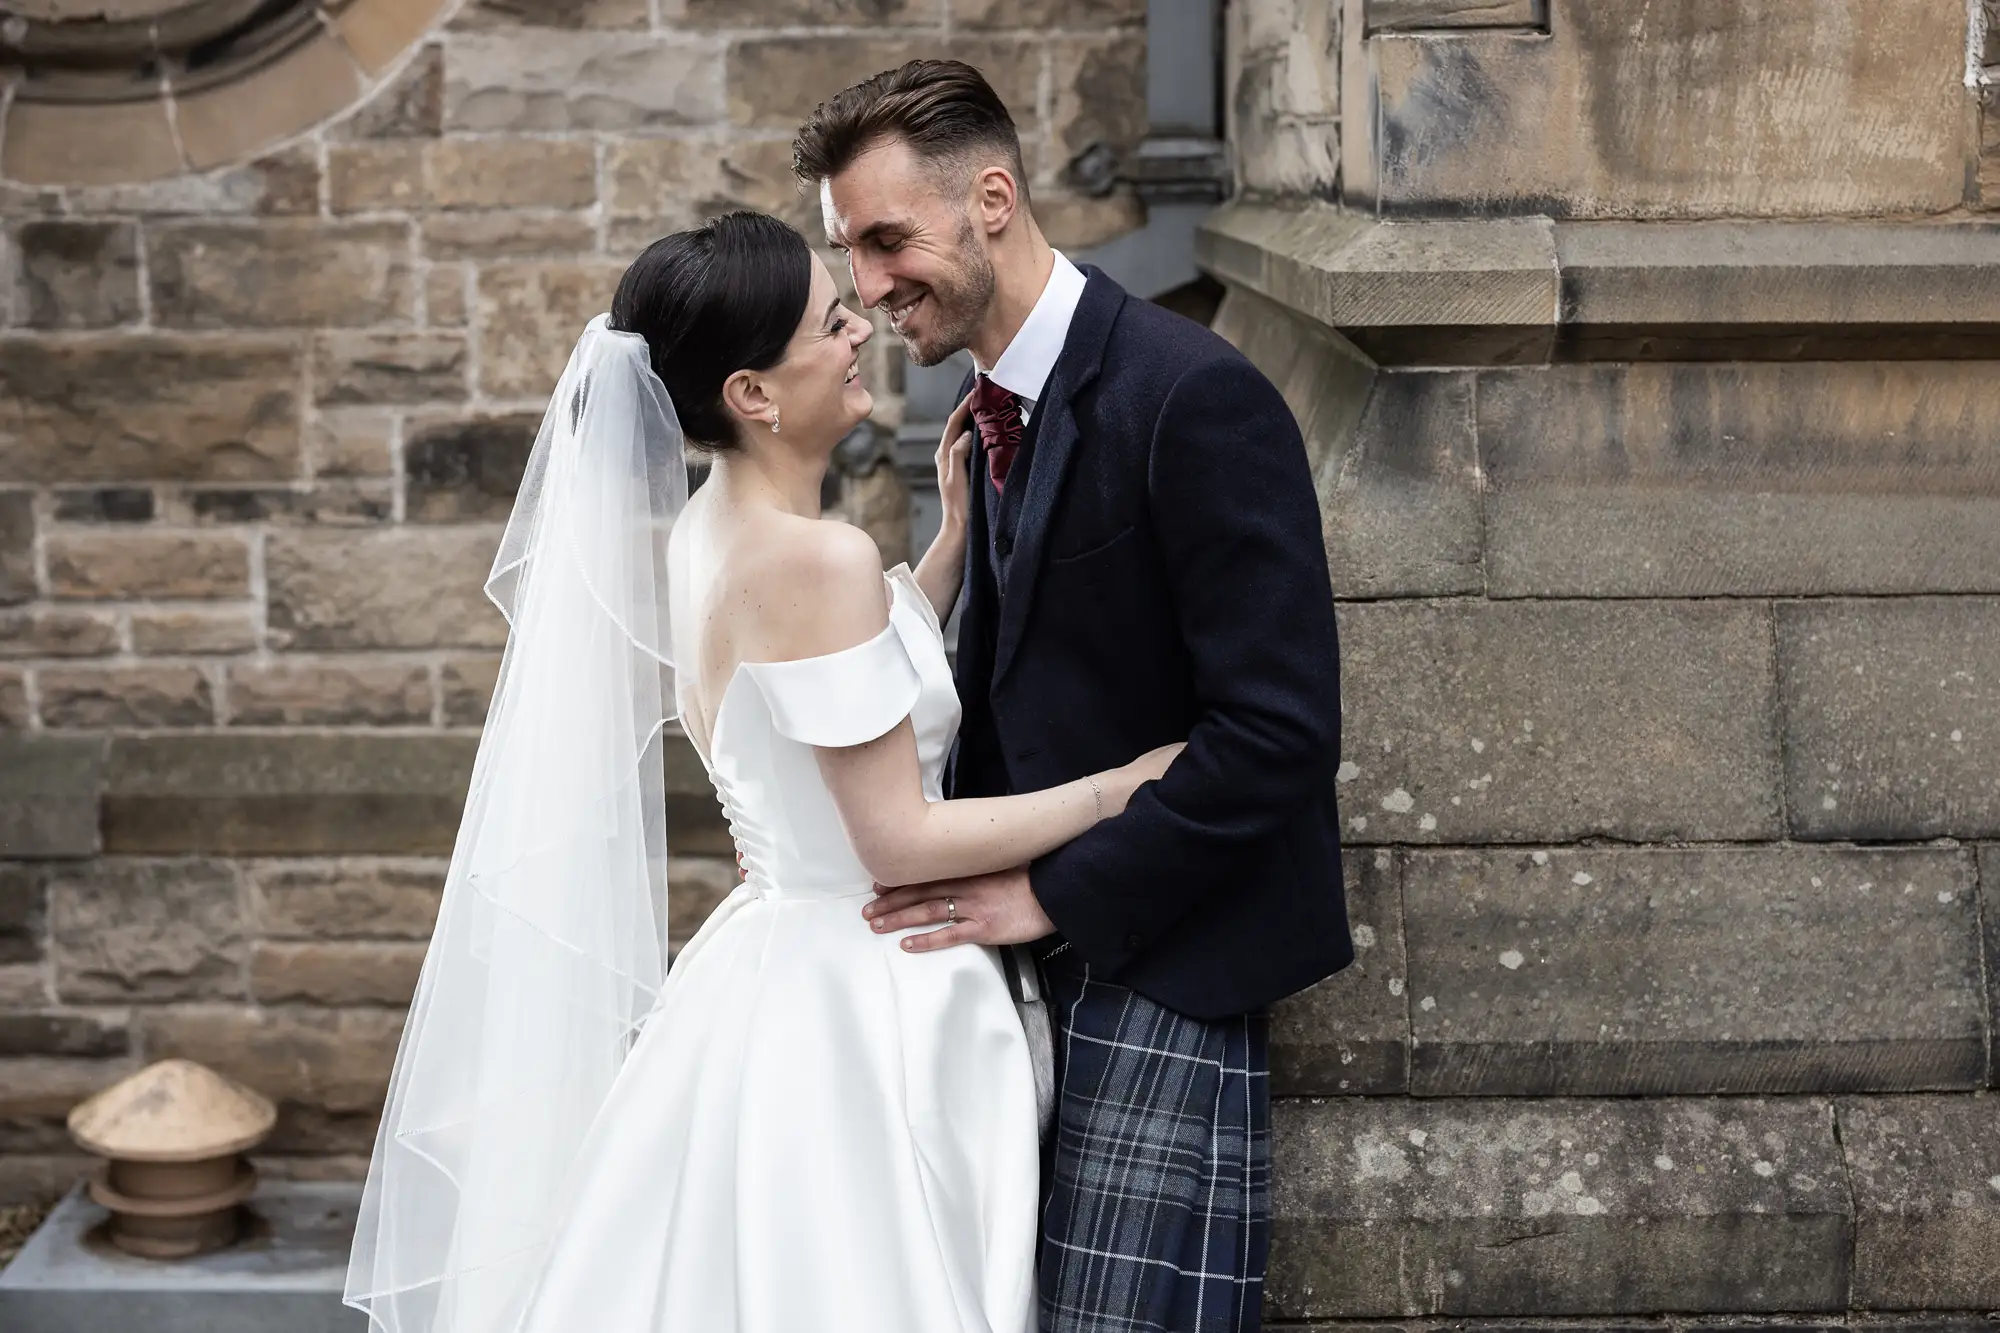 A bride and groom in wedding attire share a tender moment, with the groom in a kilt, against a historic stone building backdrop.